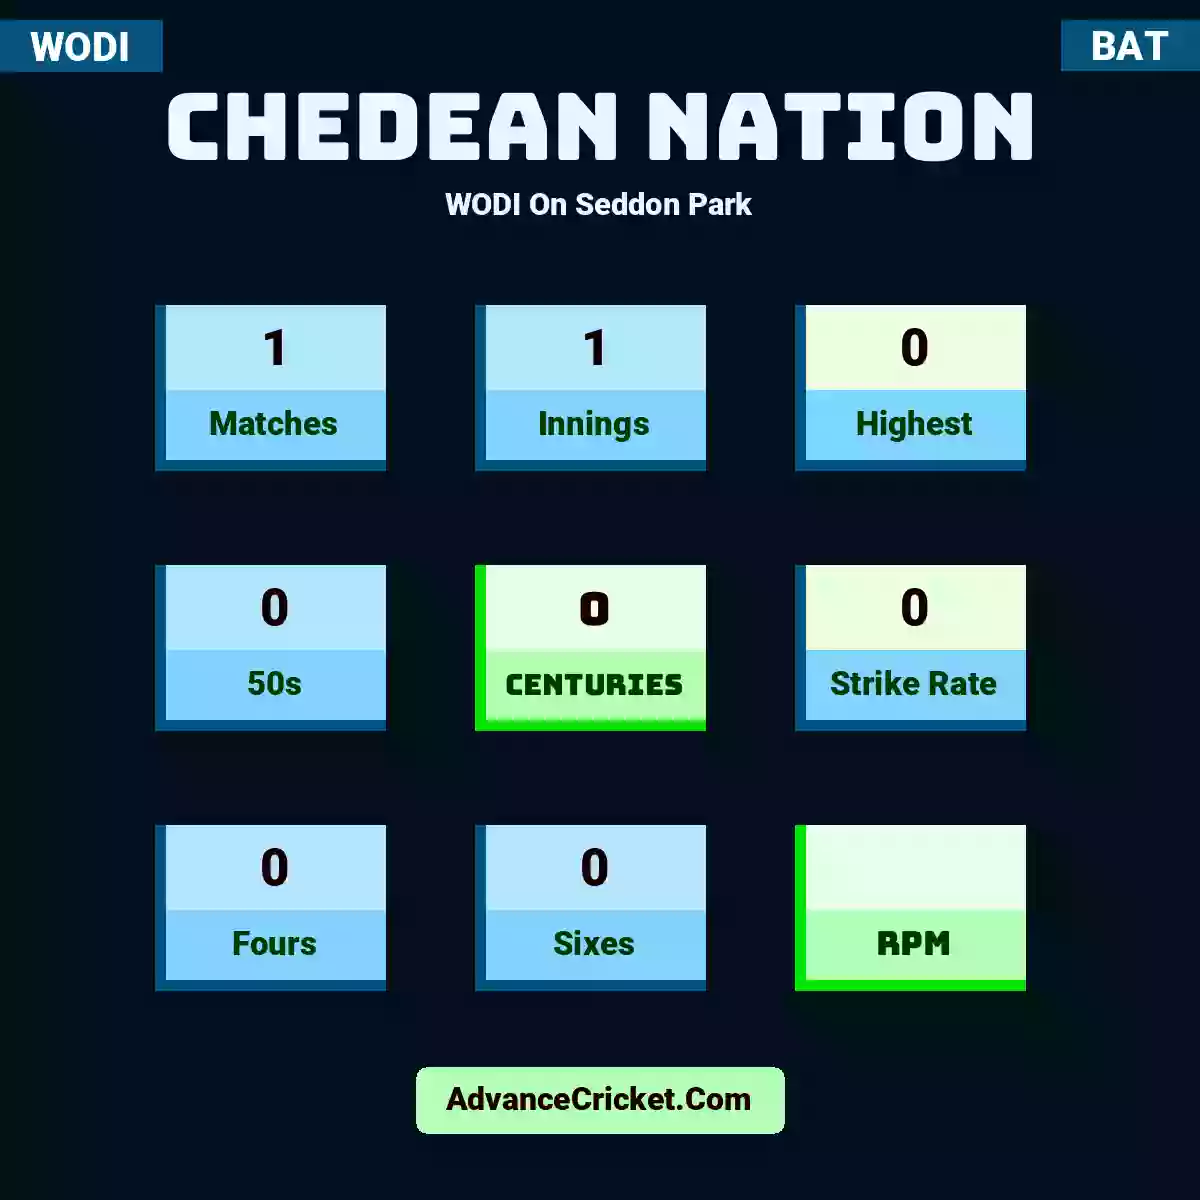 Chedean Nation WODI  On Seddon Park, Chedean Nation played 1 matches, scored 0 runs as highest, 0 half-centuries, and 0 centuries, with a strike rate of 0. C.Nation hit 0 fours and 0 sixes.